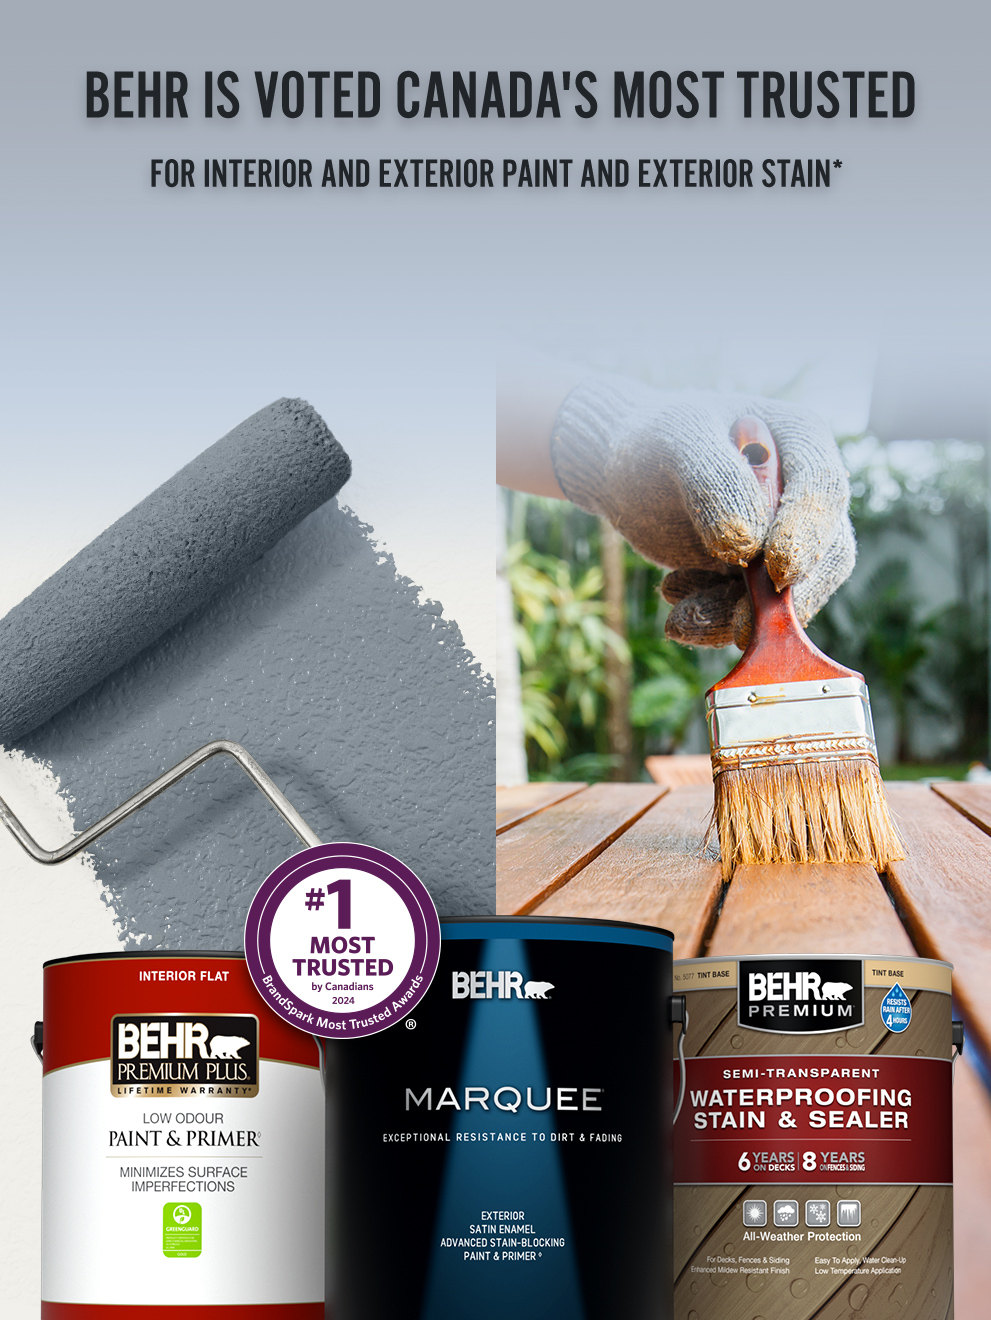 Voted Most Trusted for Interior and Exterior Paint and Exterior Stain